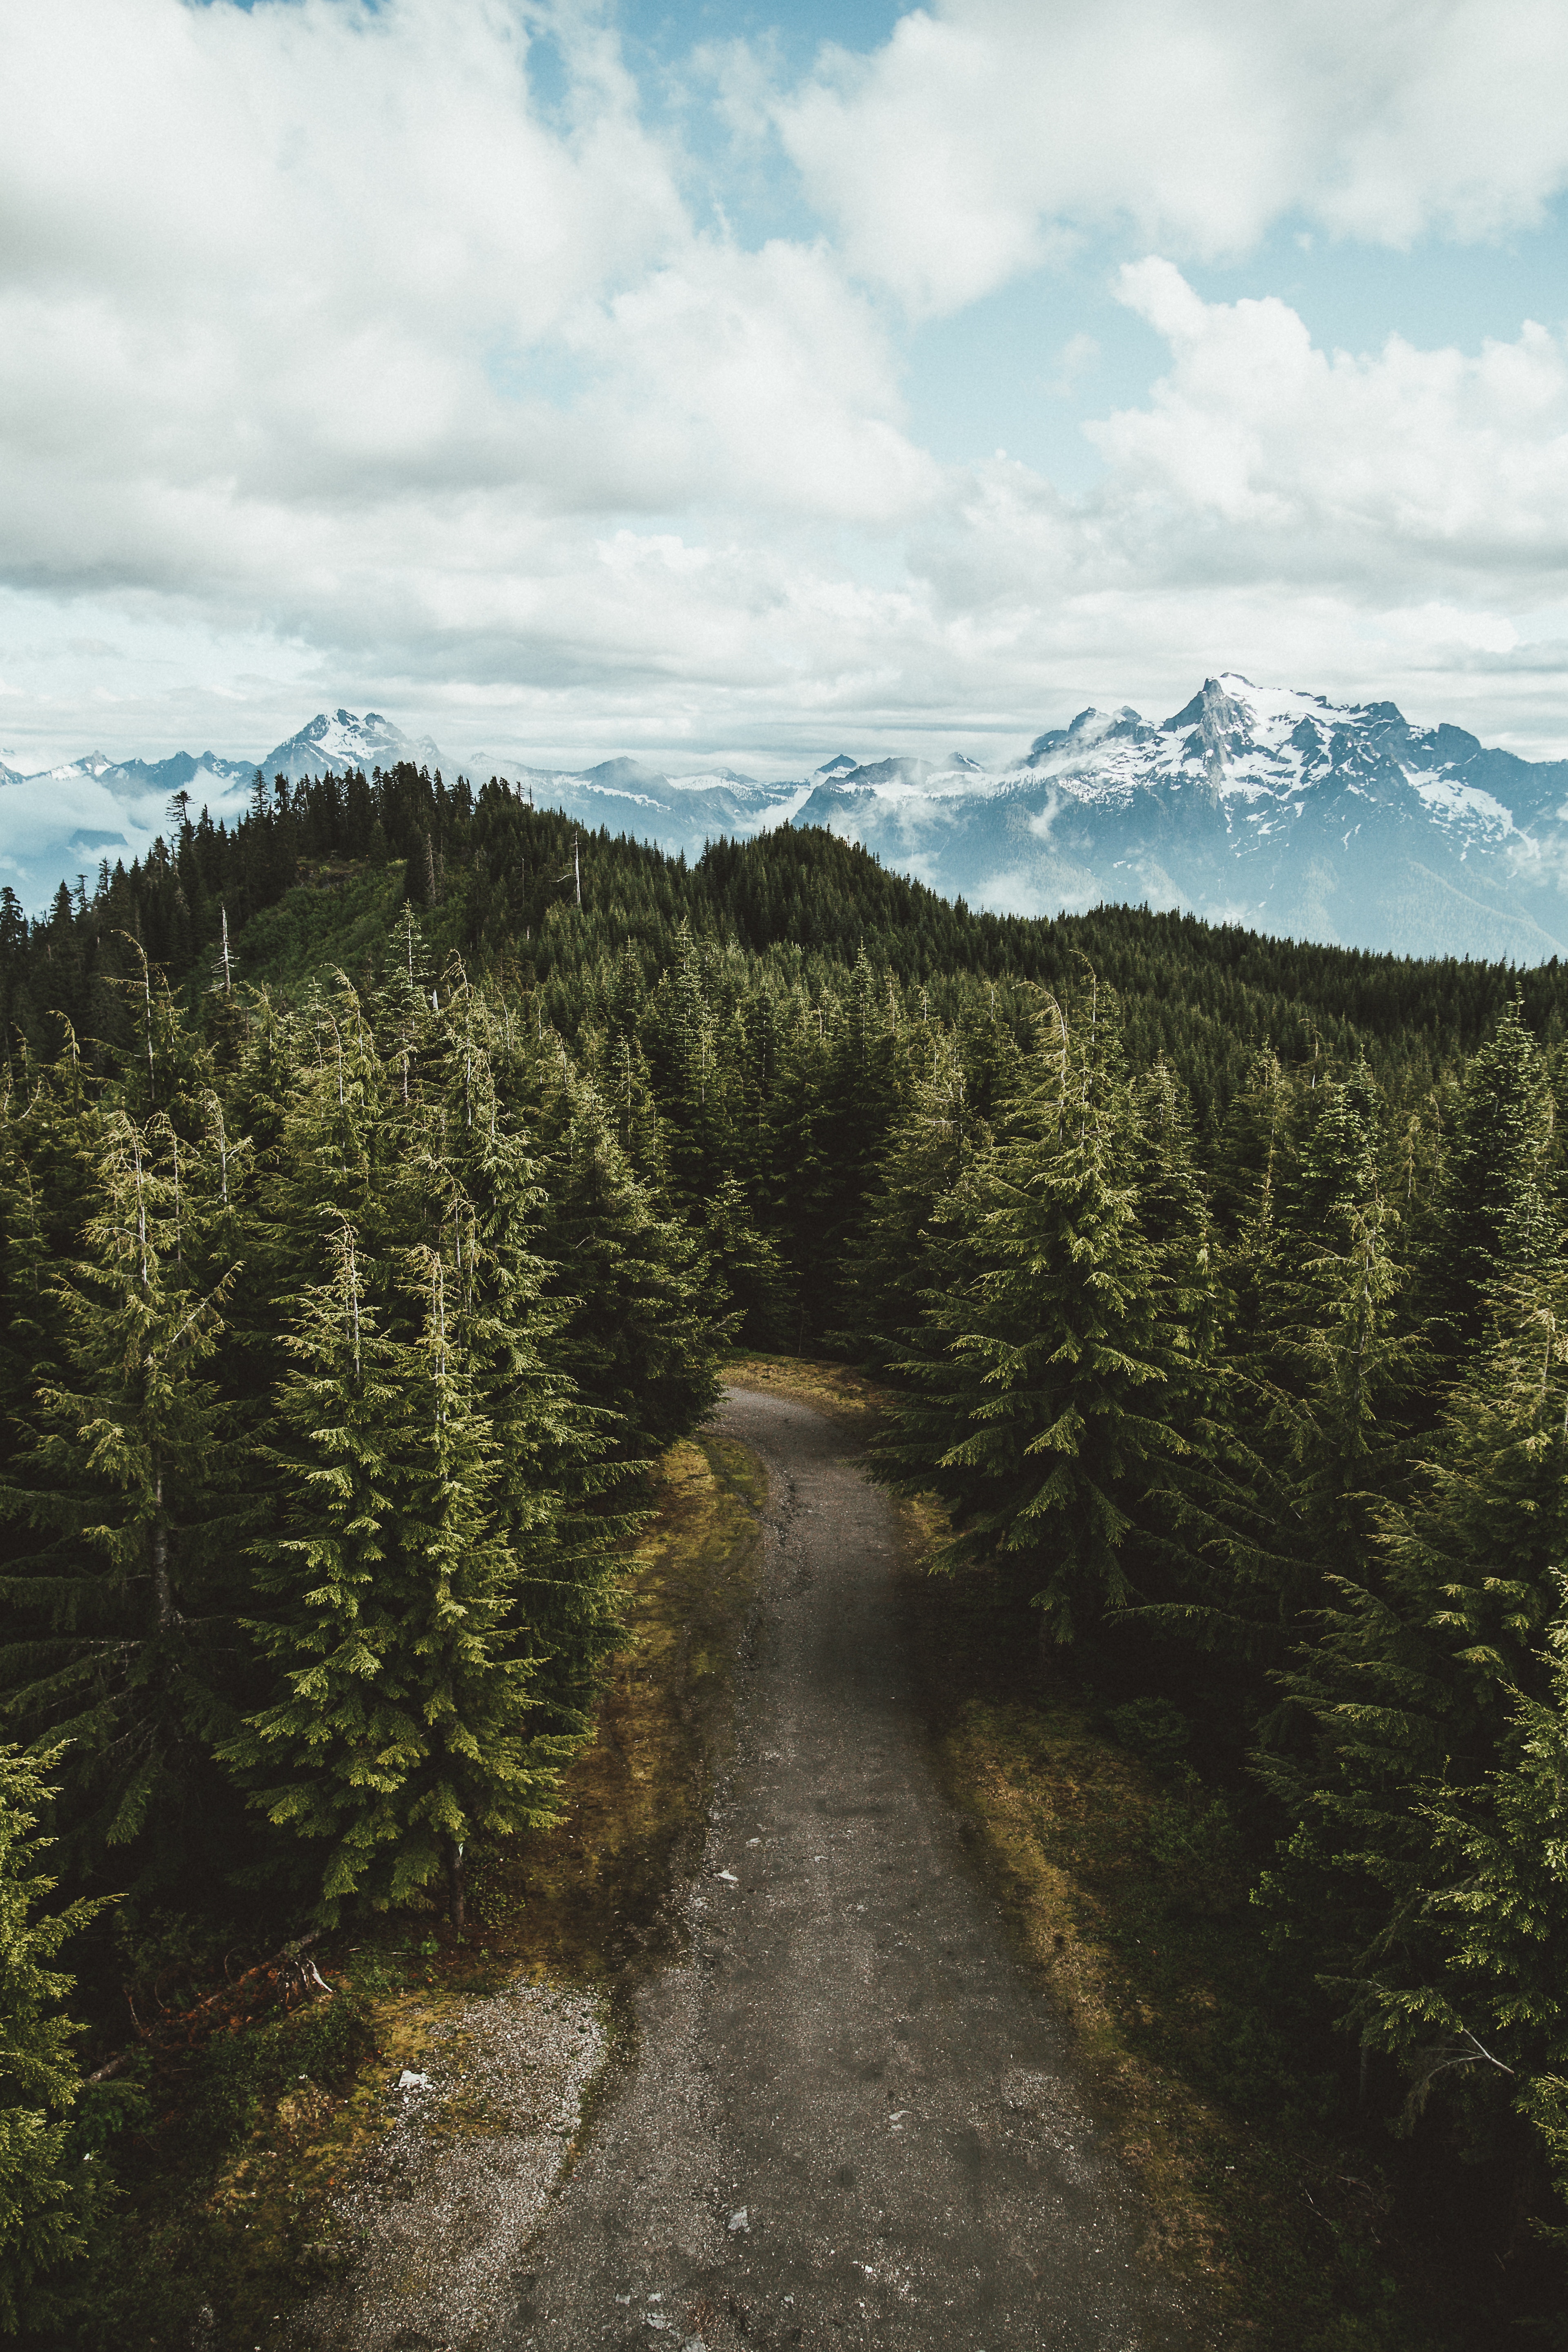 usa, united states, landscape, nature, trees, sky, mountains, view from above, road, darrington Full HD